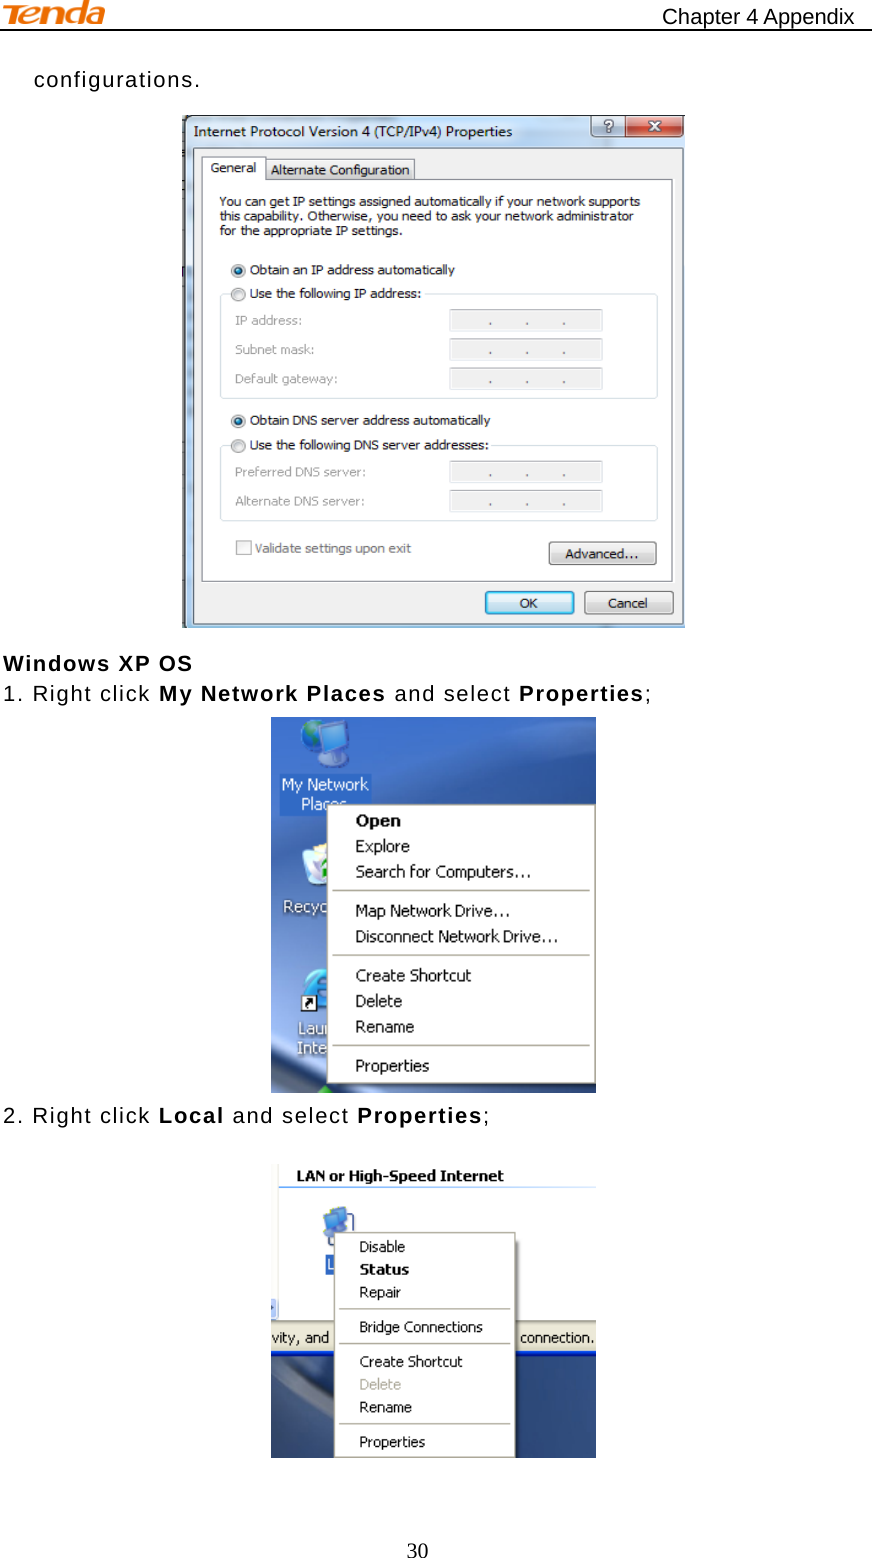                                                    Chapter 4 Appendix 30 configurations.  Windows XP OS 1. Right click My Network Places and select Properties;  2. Right click Local and select Properties;  